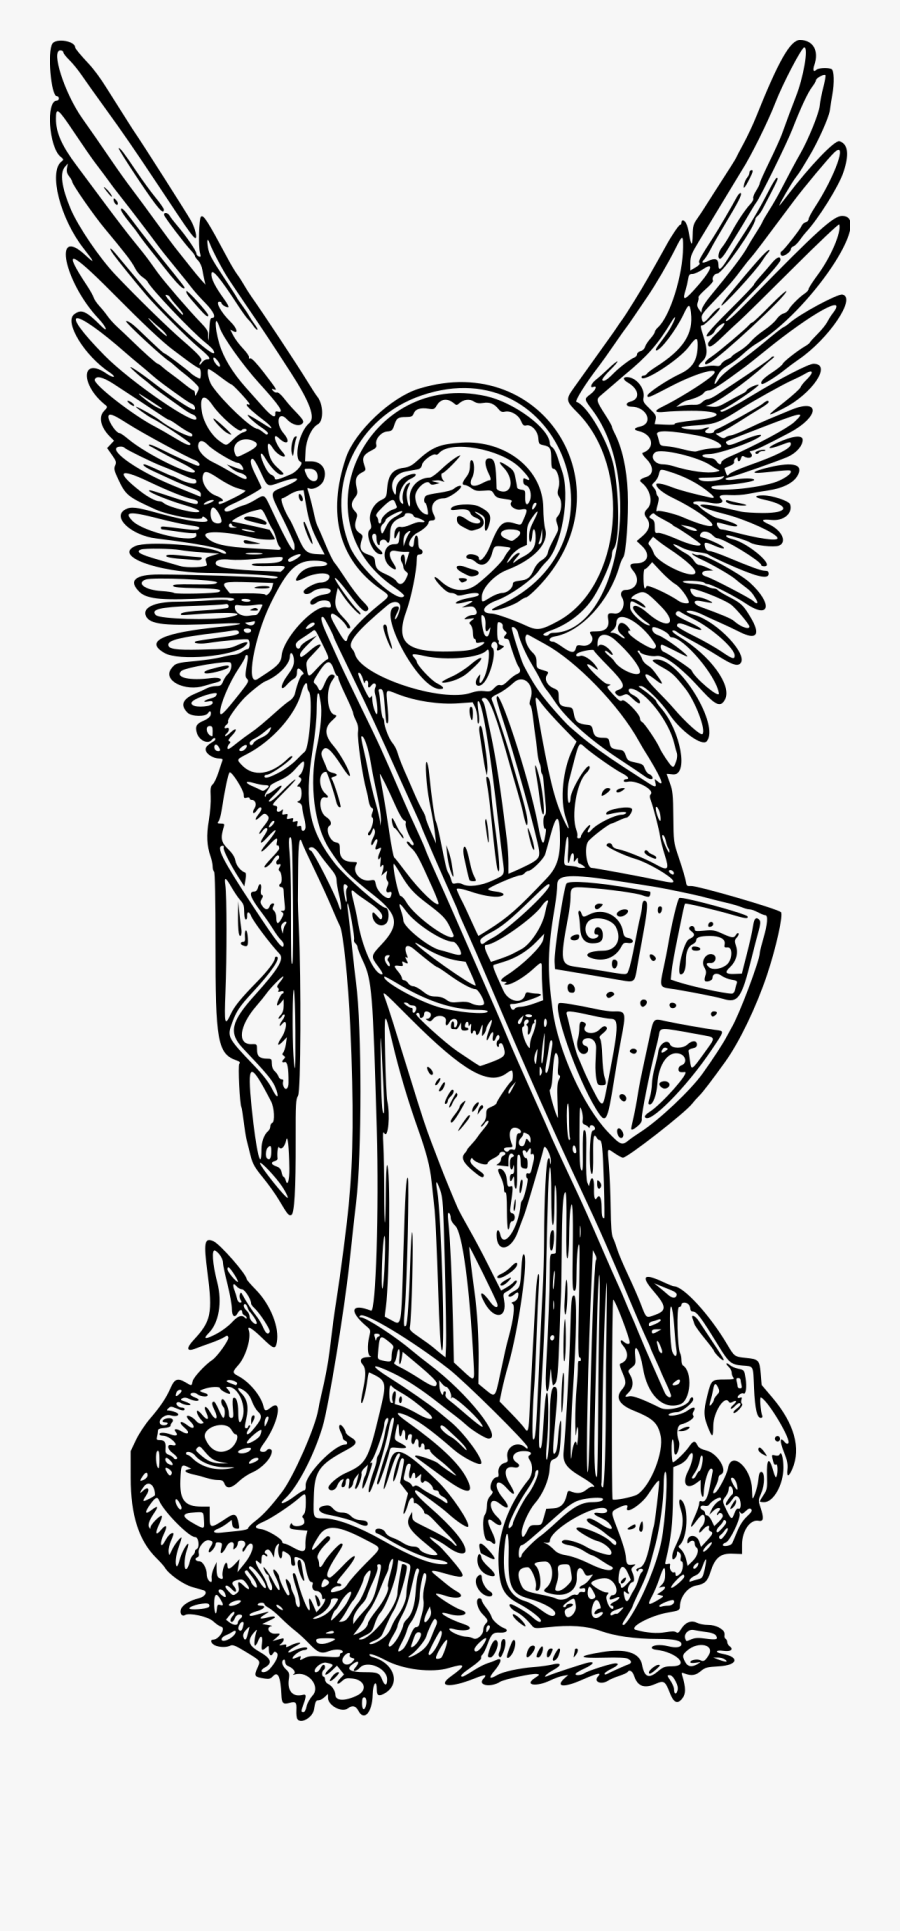 This Free Icons Png Design Of St Michael - St Michael The Archangel Drawing, Transparent Clipart